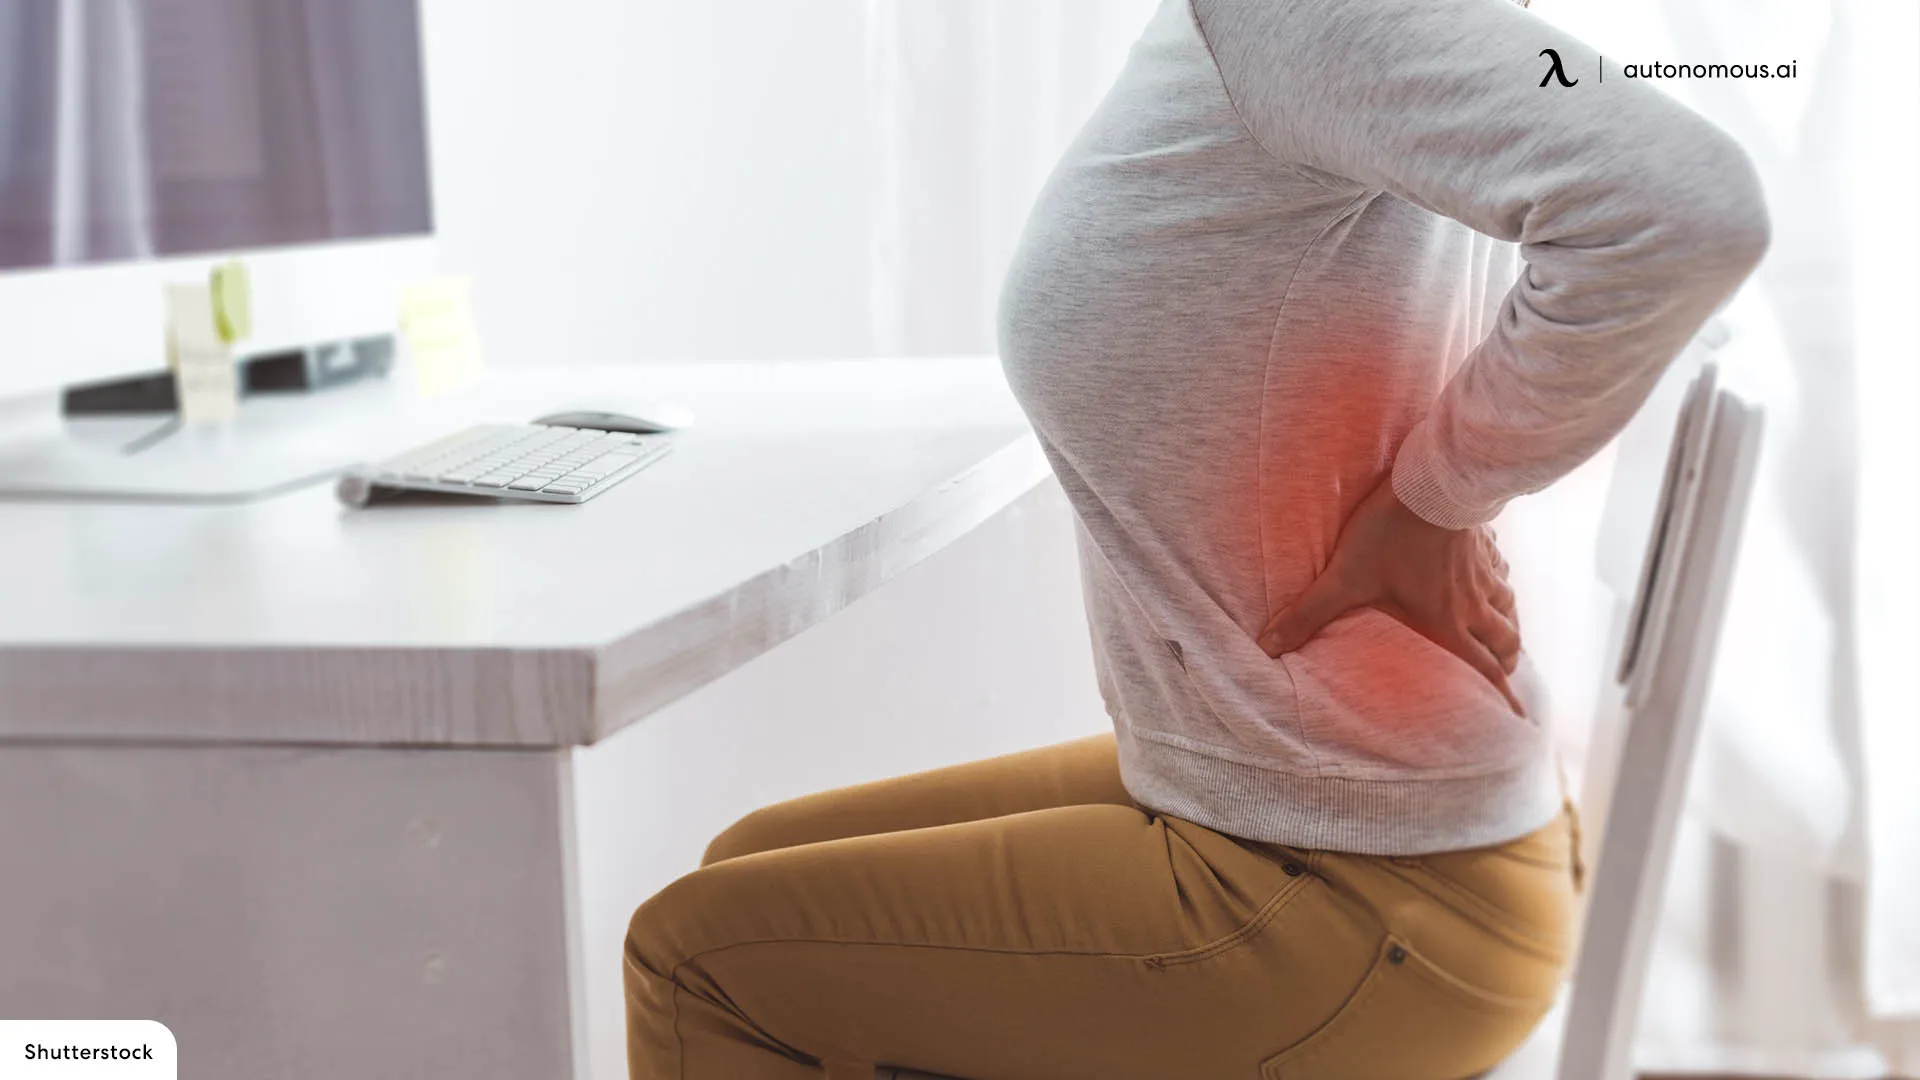 Unhealthy Shape causes back pain when sitting